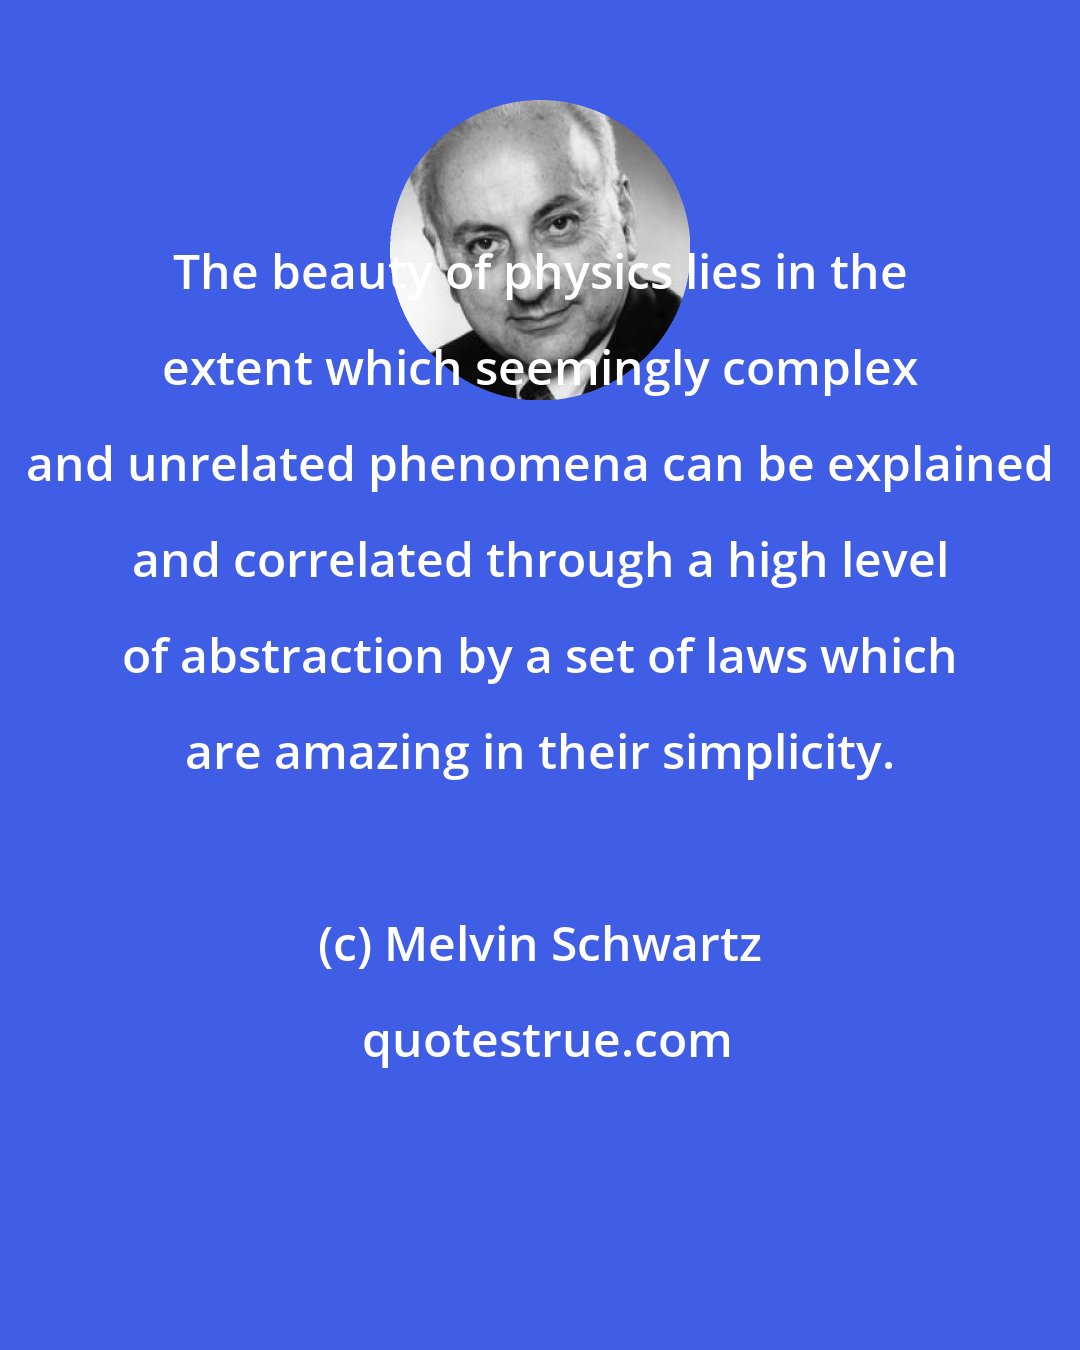 Melvin Schwartz: The beauty of physics lies in the extent which seemingly complex and unrelated phenomena can be explained and correlated through a high level of abstraction by a set of laws which are amazing in their simplicity.